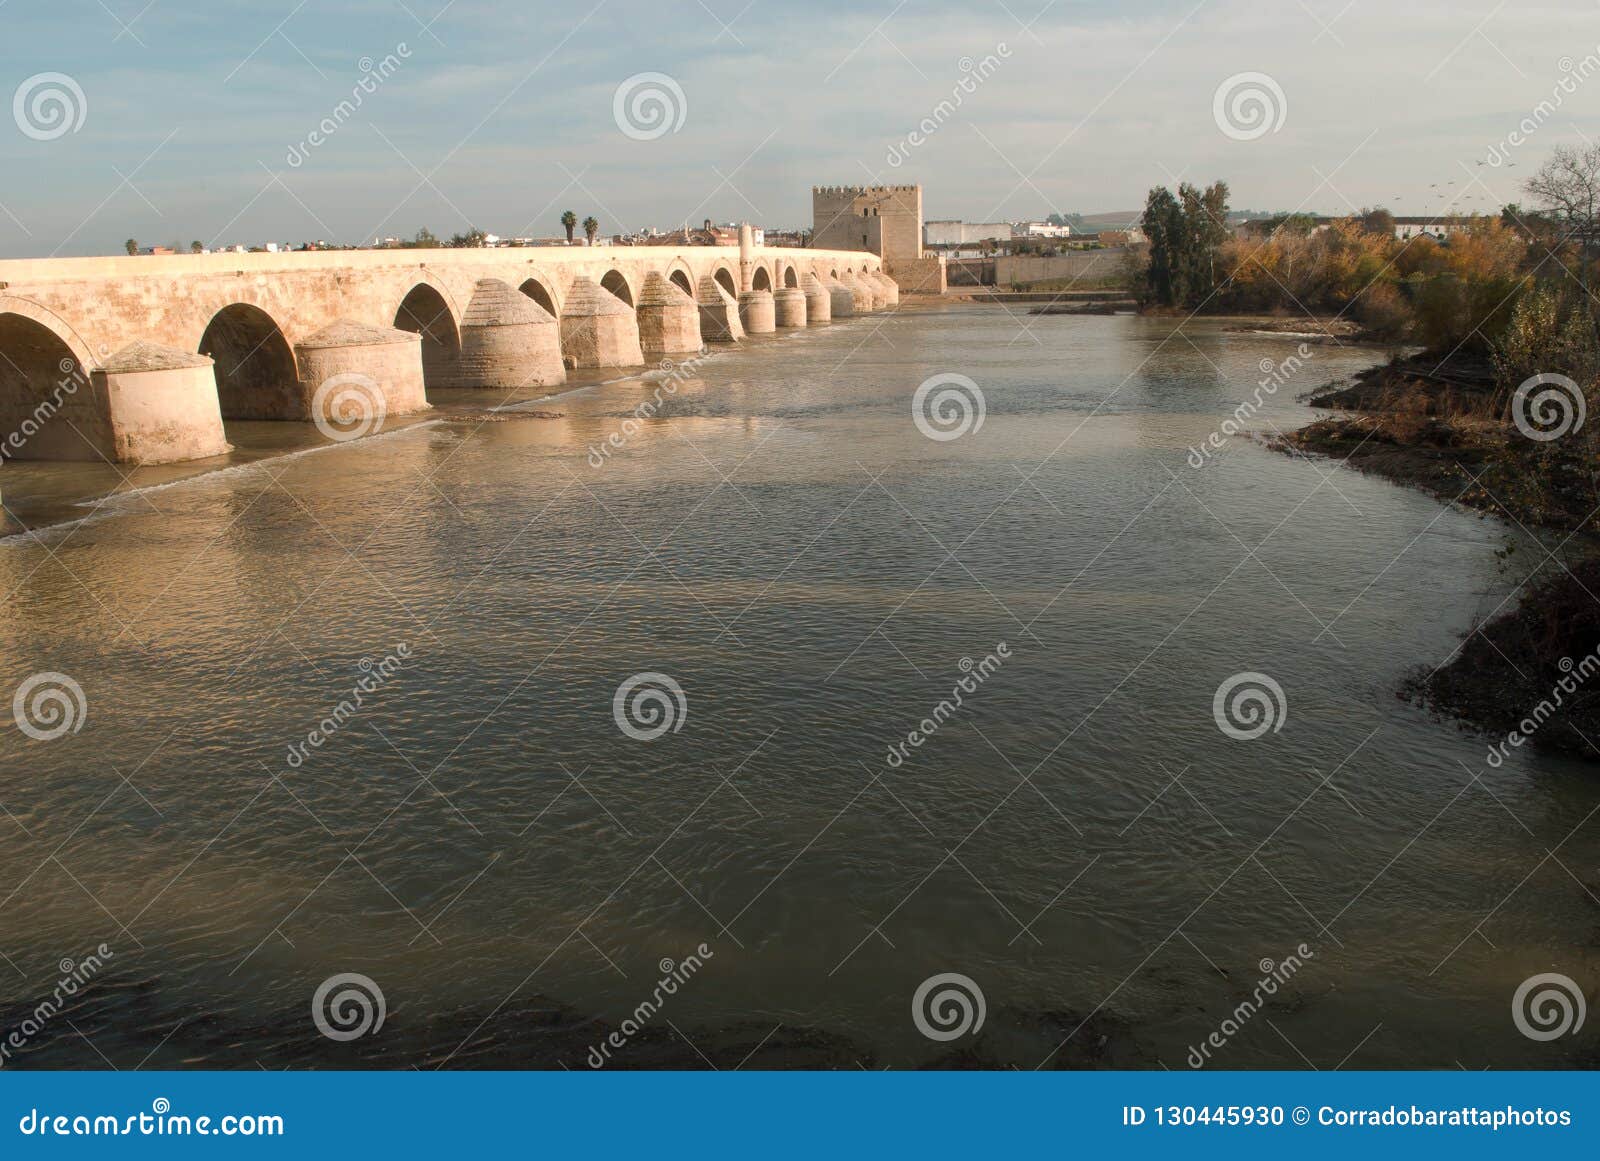 the beautiful roman bridge over the river guadalquivir leading to the town of cordoba in andalusia